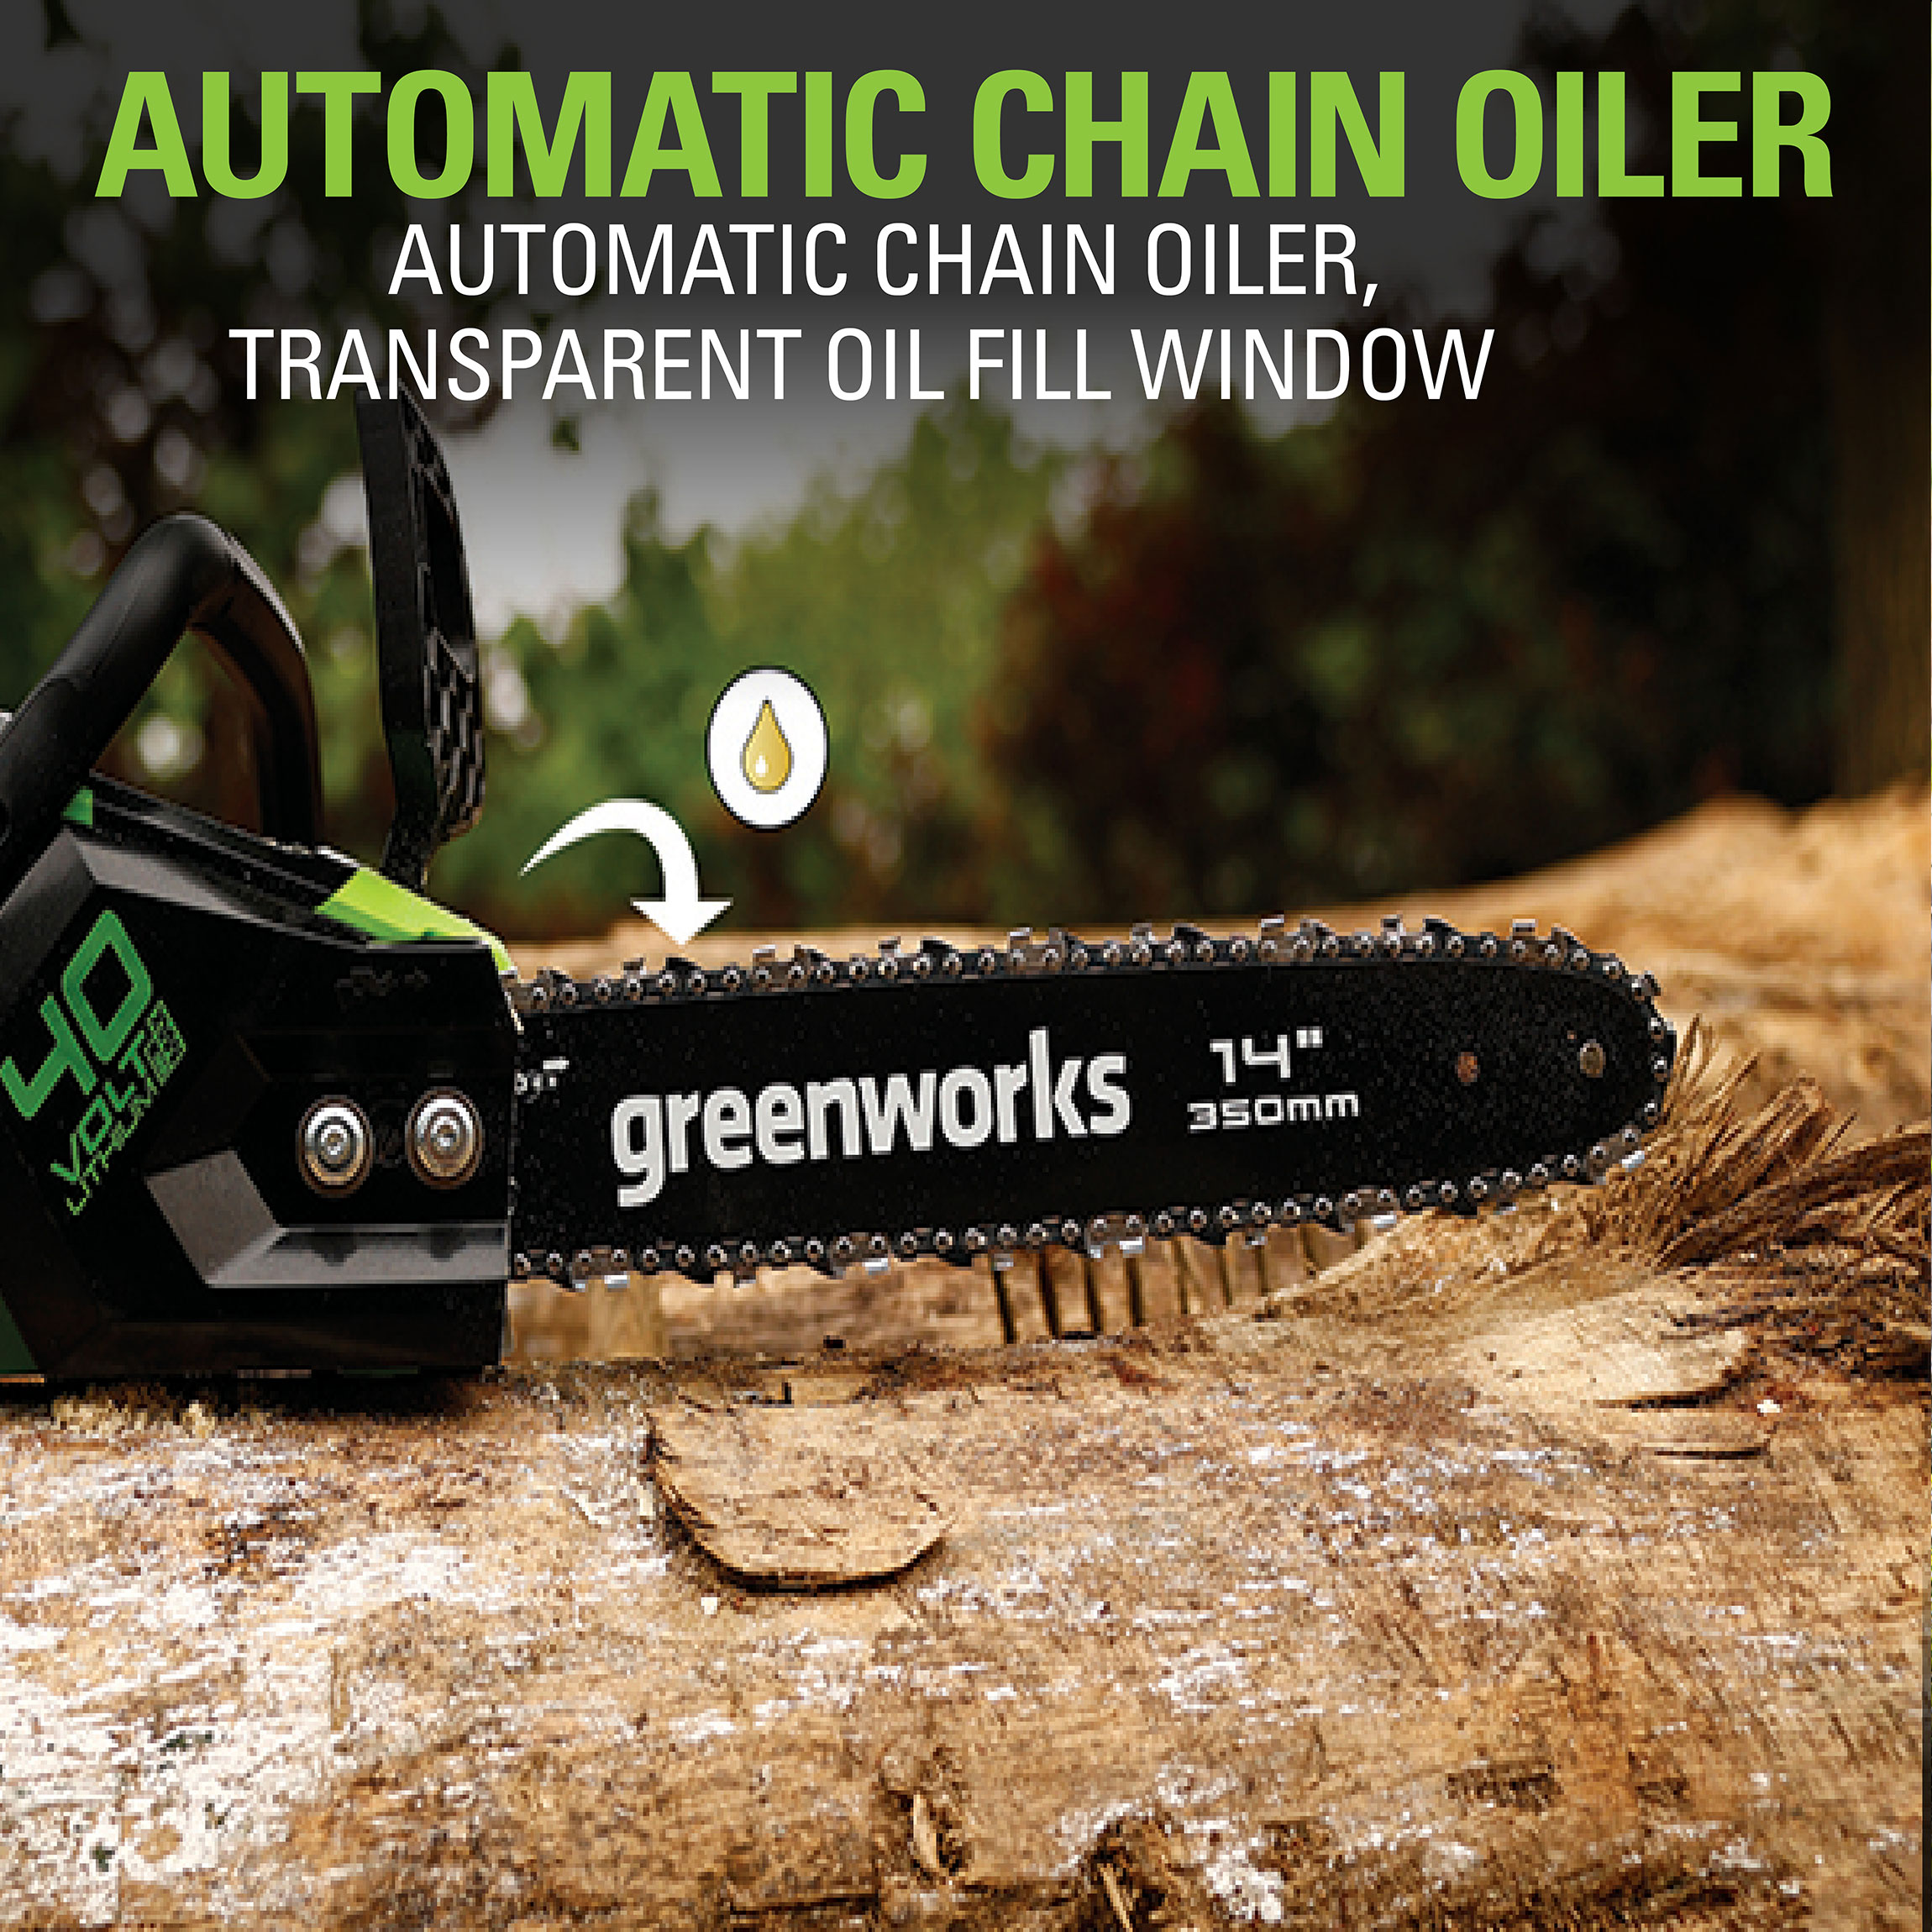 Greenworks 40V 14" Brushless Chainsaw with 2.5 Ah Battery & Charger 2012802 - image 4 of 13